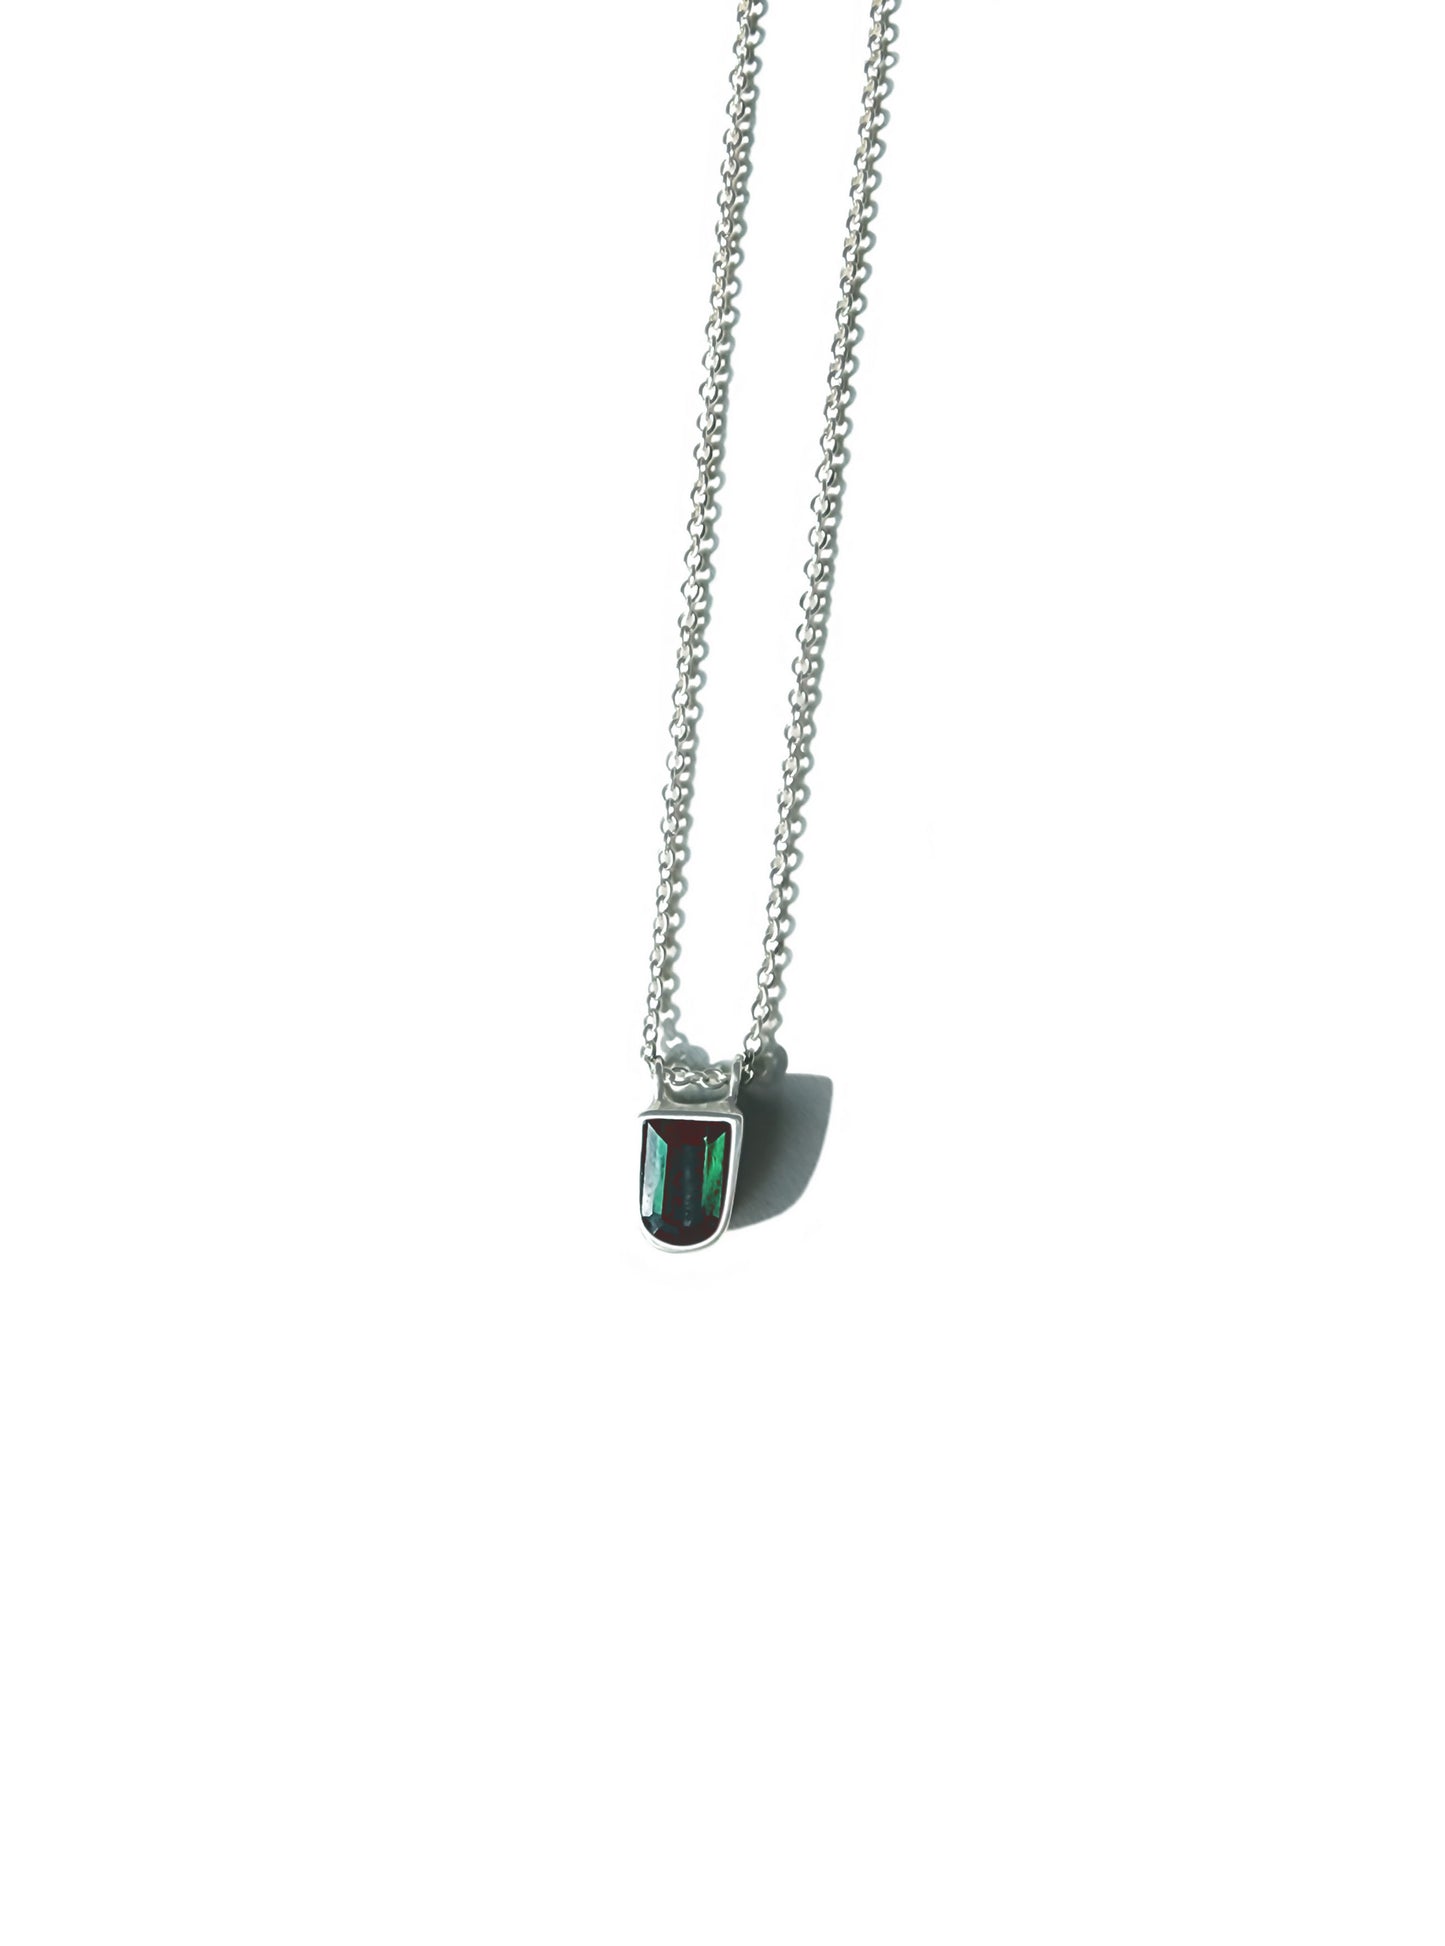 Faceted Elongated Semi-Circle Blue-Green Tourmaline Necklace